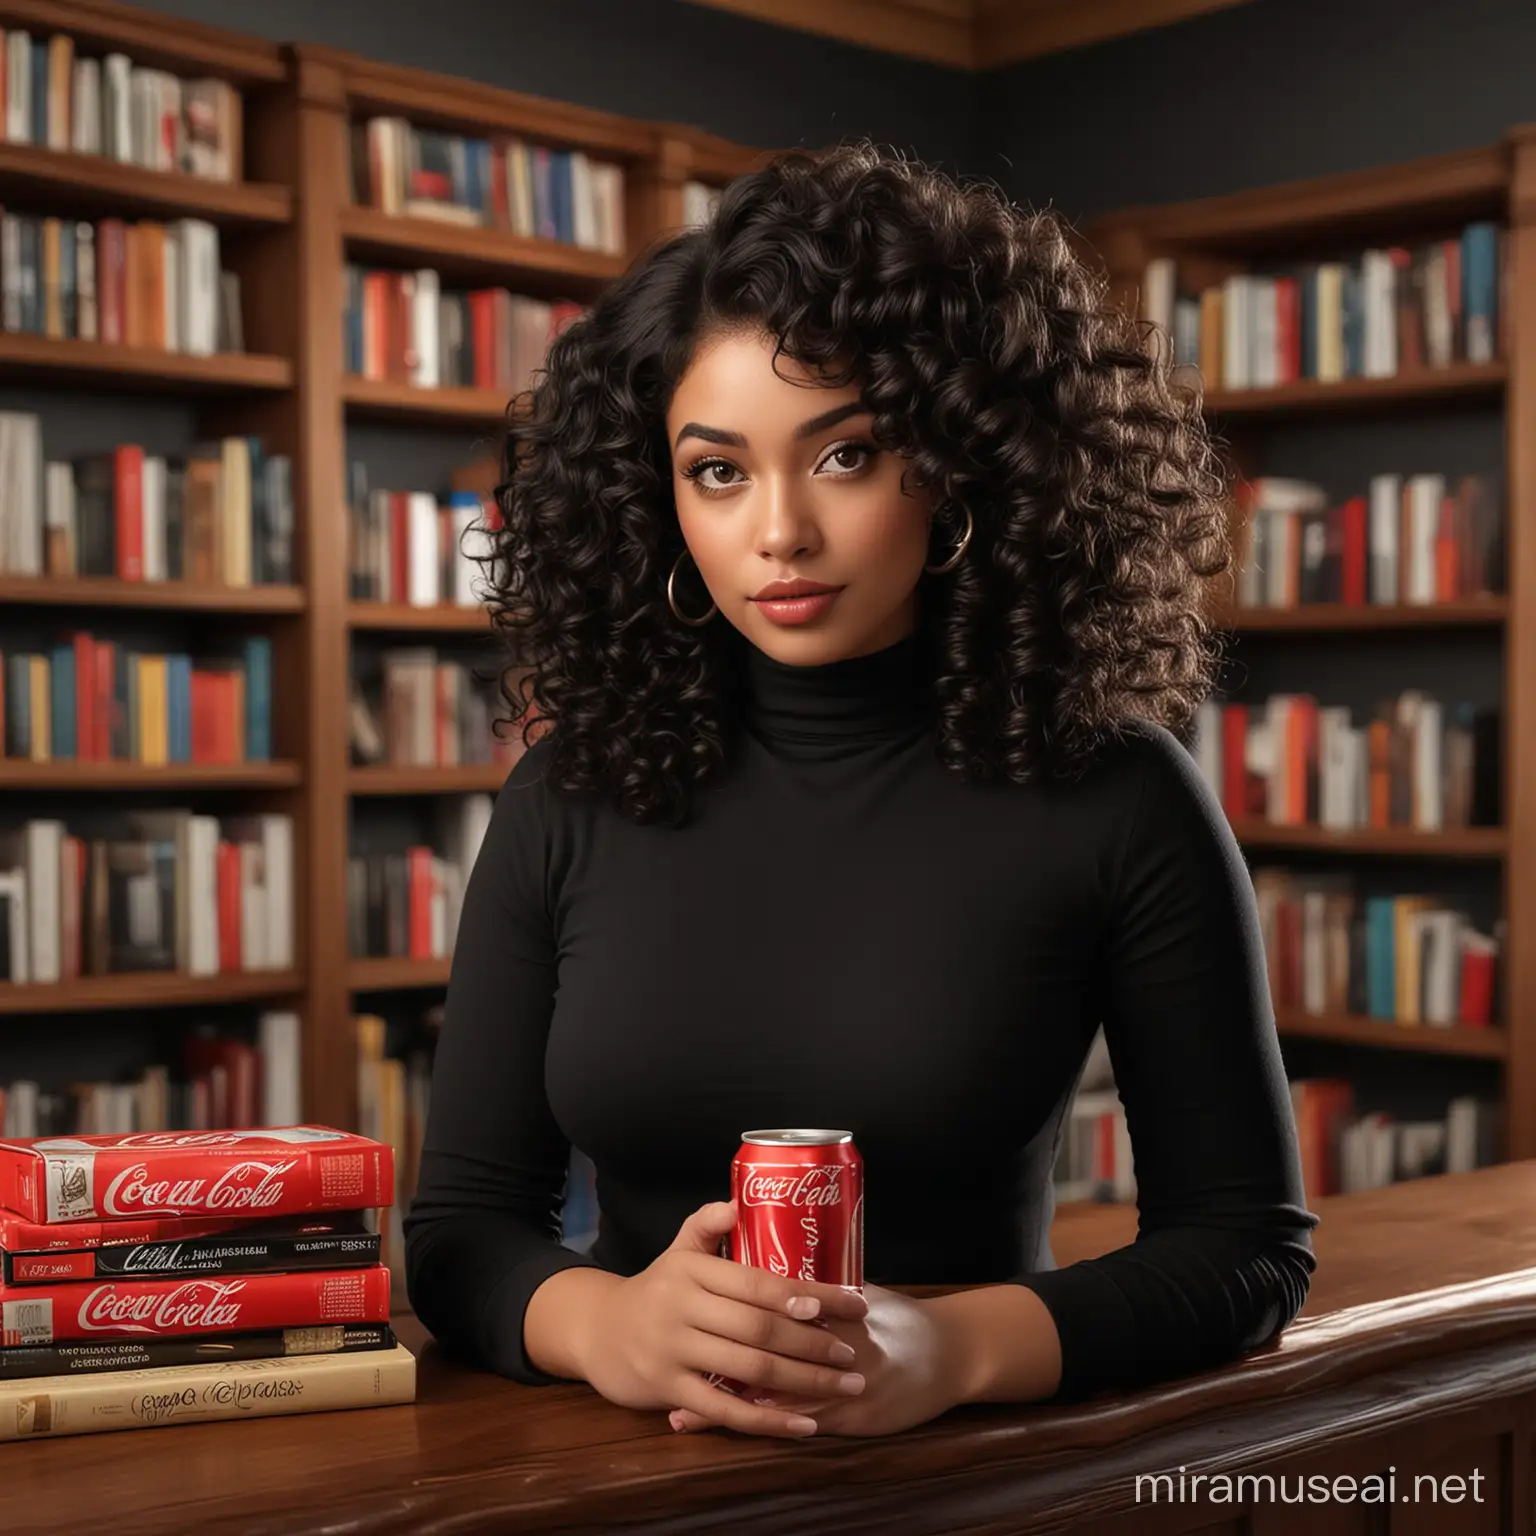 Elegant Curvaceous Woman with Voluminous Curls and Black Turtleneck in a Luxurious BookFilled Room